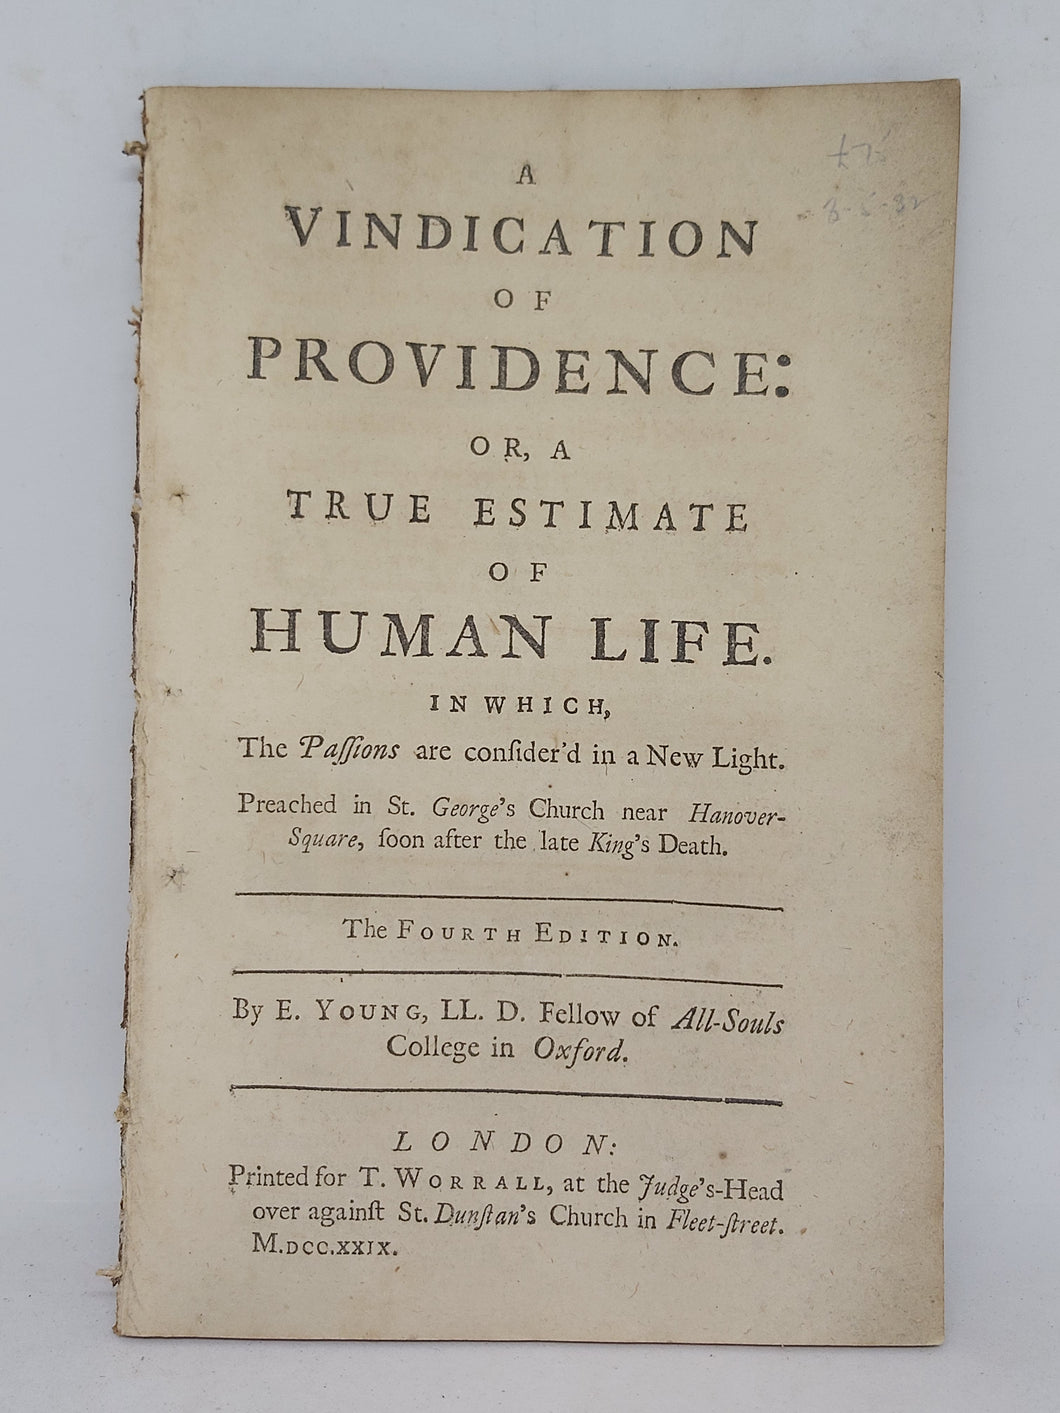 A vindication of Providence: or, A true estimate of human life: in which the passions are consider'd in a new light: preach'd in St. George's Church near Hanover-Square, soon after the late King's death, 1729